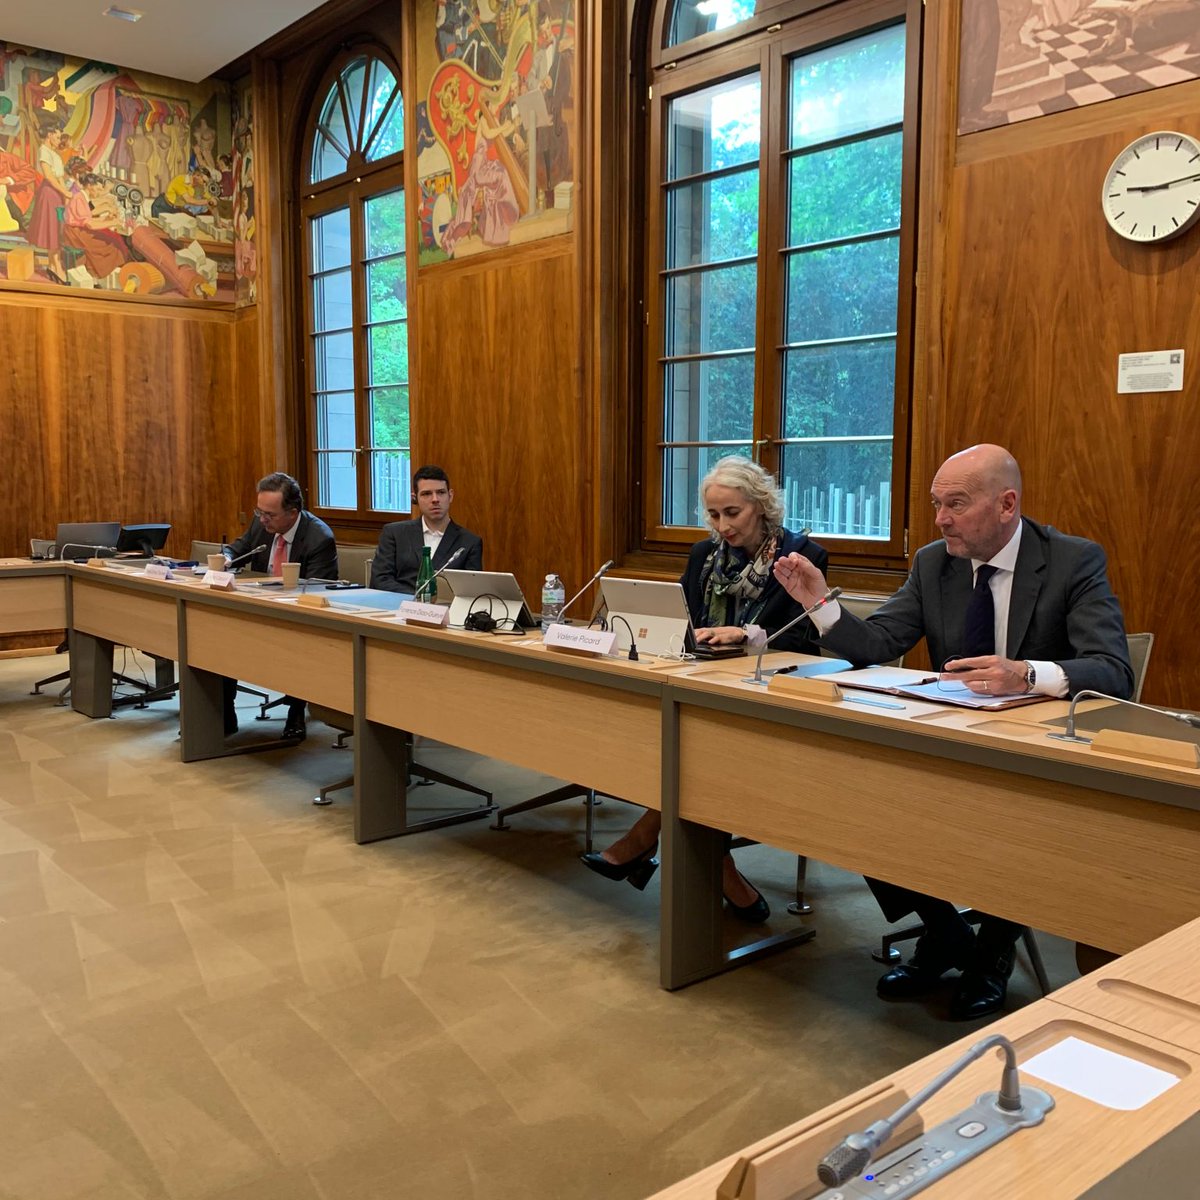 Recently, our Global Trade & Investment Policy Commission Meeting convened to focus on the most pressing issues facing the global trading system & discussed ICC's engagements on #digitaltrade, E-Commerce Moratorium, #trade & environment, WTO reform. More: bit.ly/3Vc3EJS